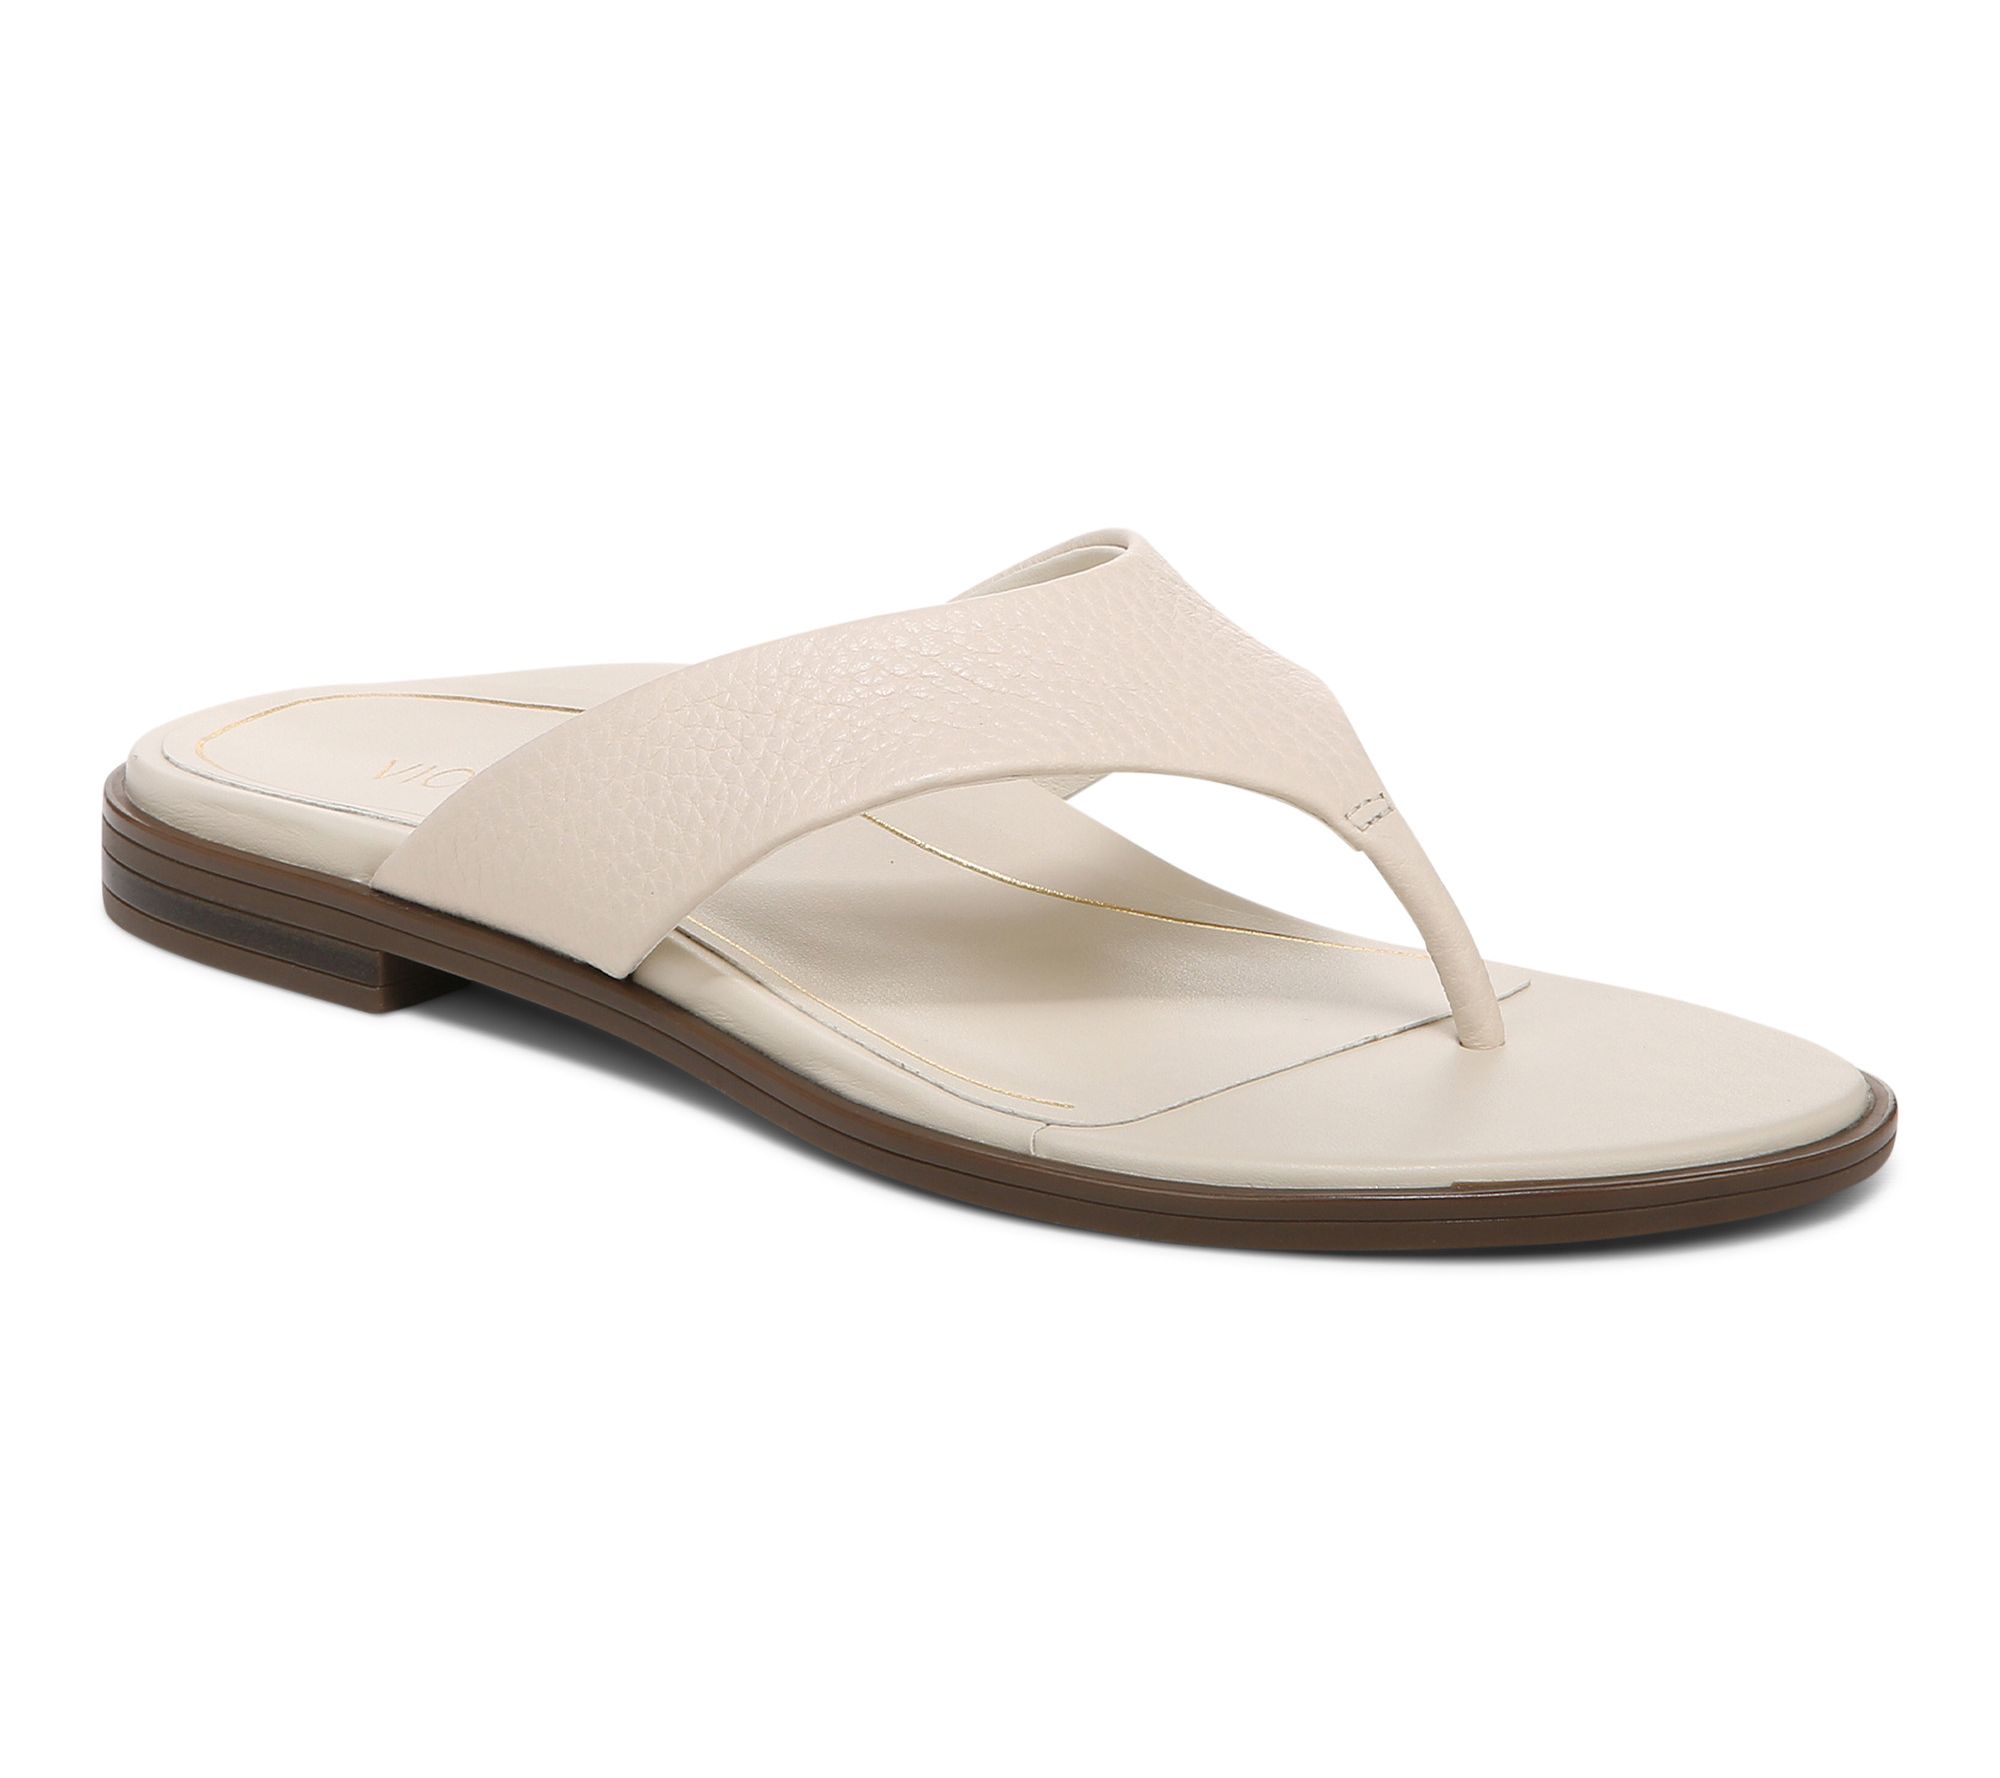 Vionic Leather or Suede Thong Sandals - Agave 